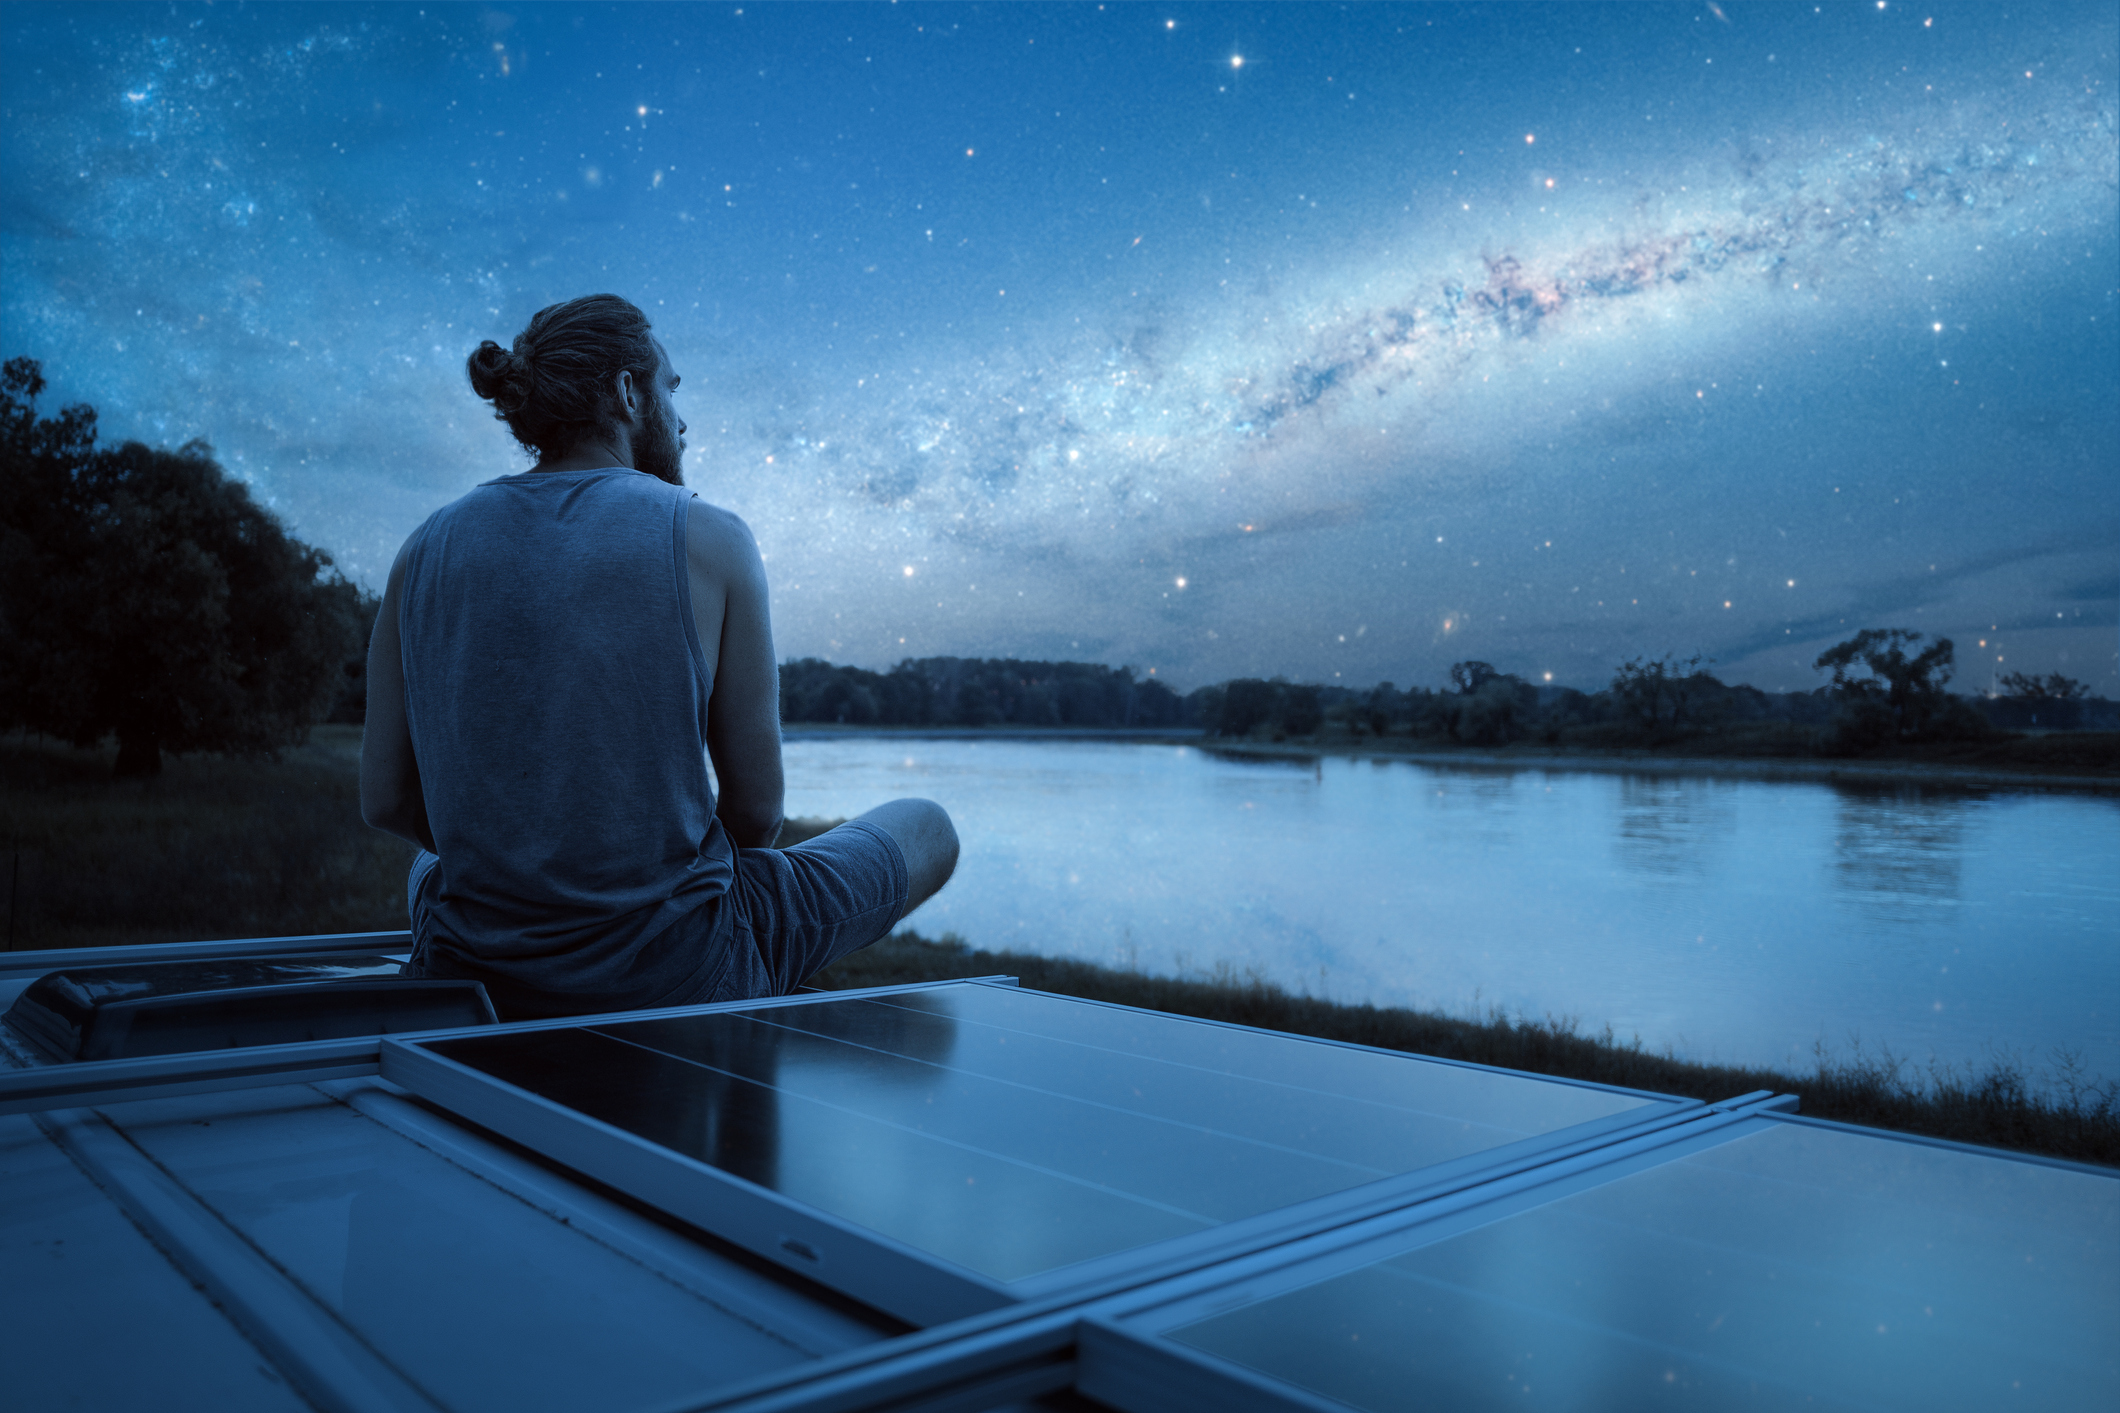 A young man is sitting on the roof of a camper van during nighttime with a beautiful starry night sky above him.